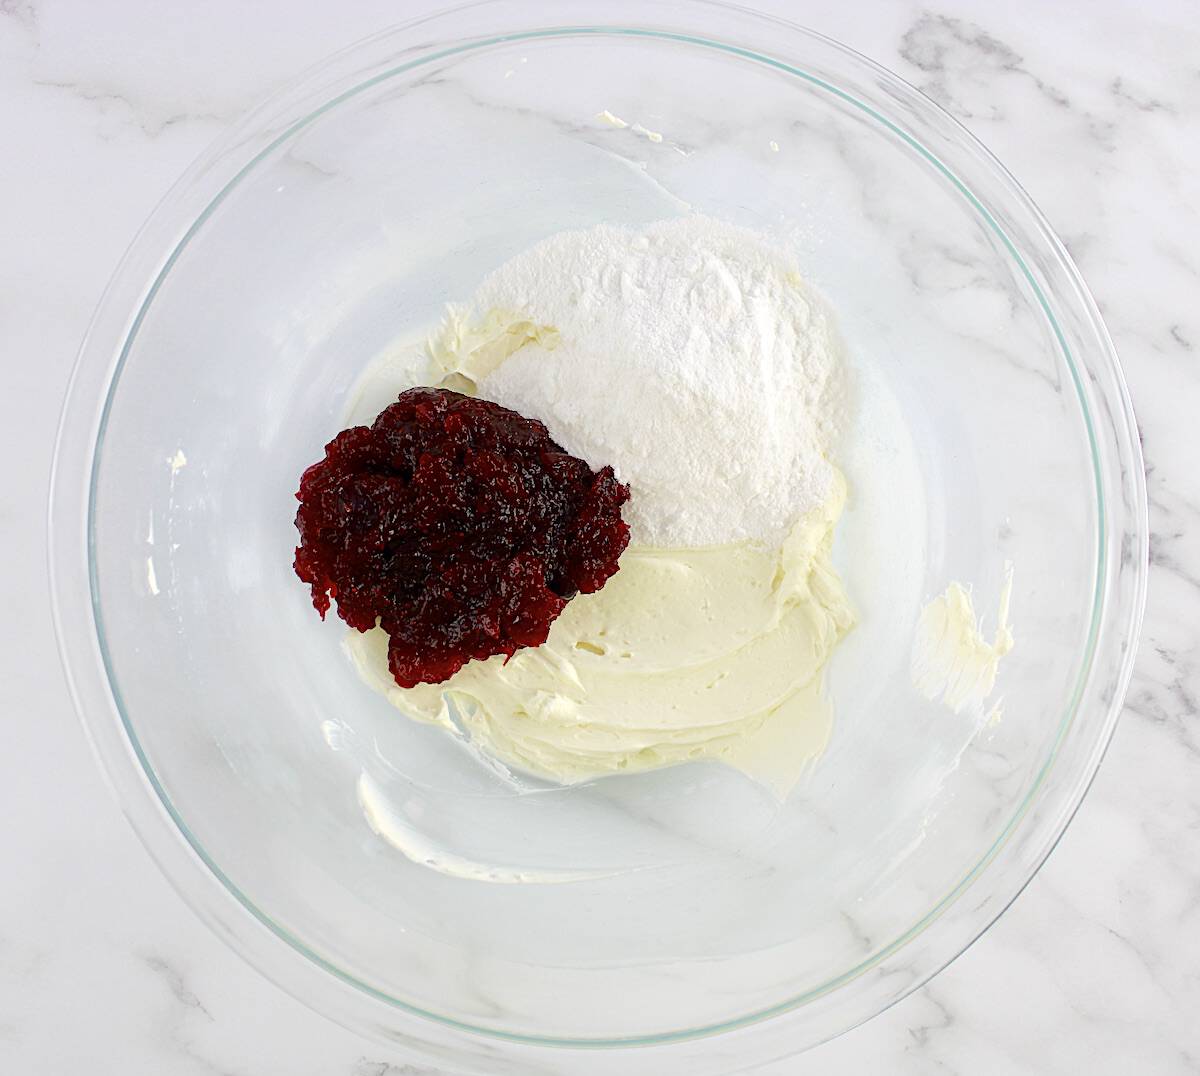 cream cheese, sweetener and cranberry sauce unmixed in glass bowl